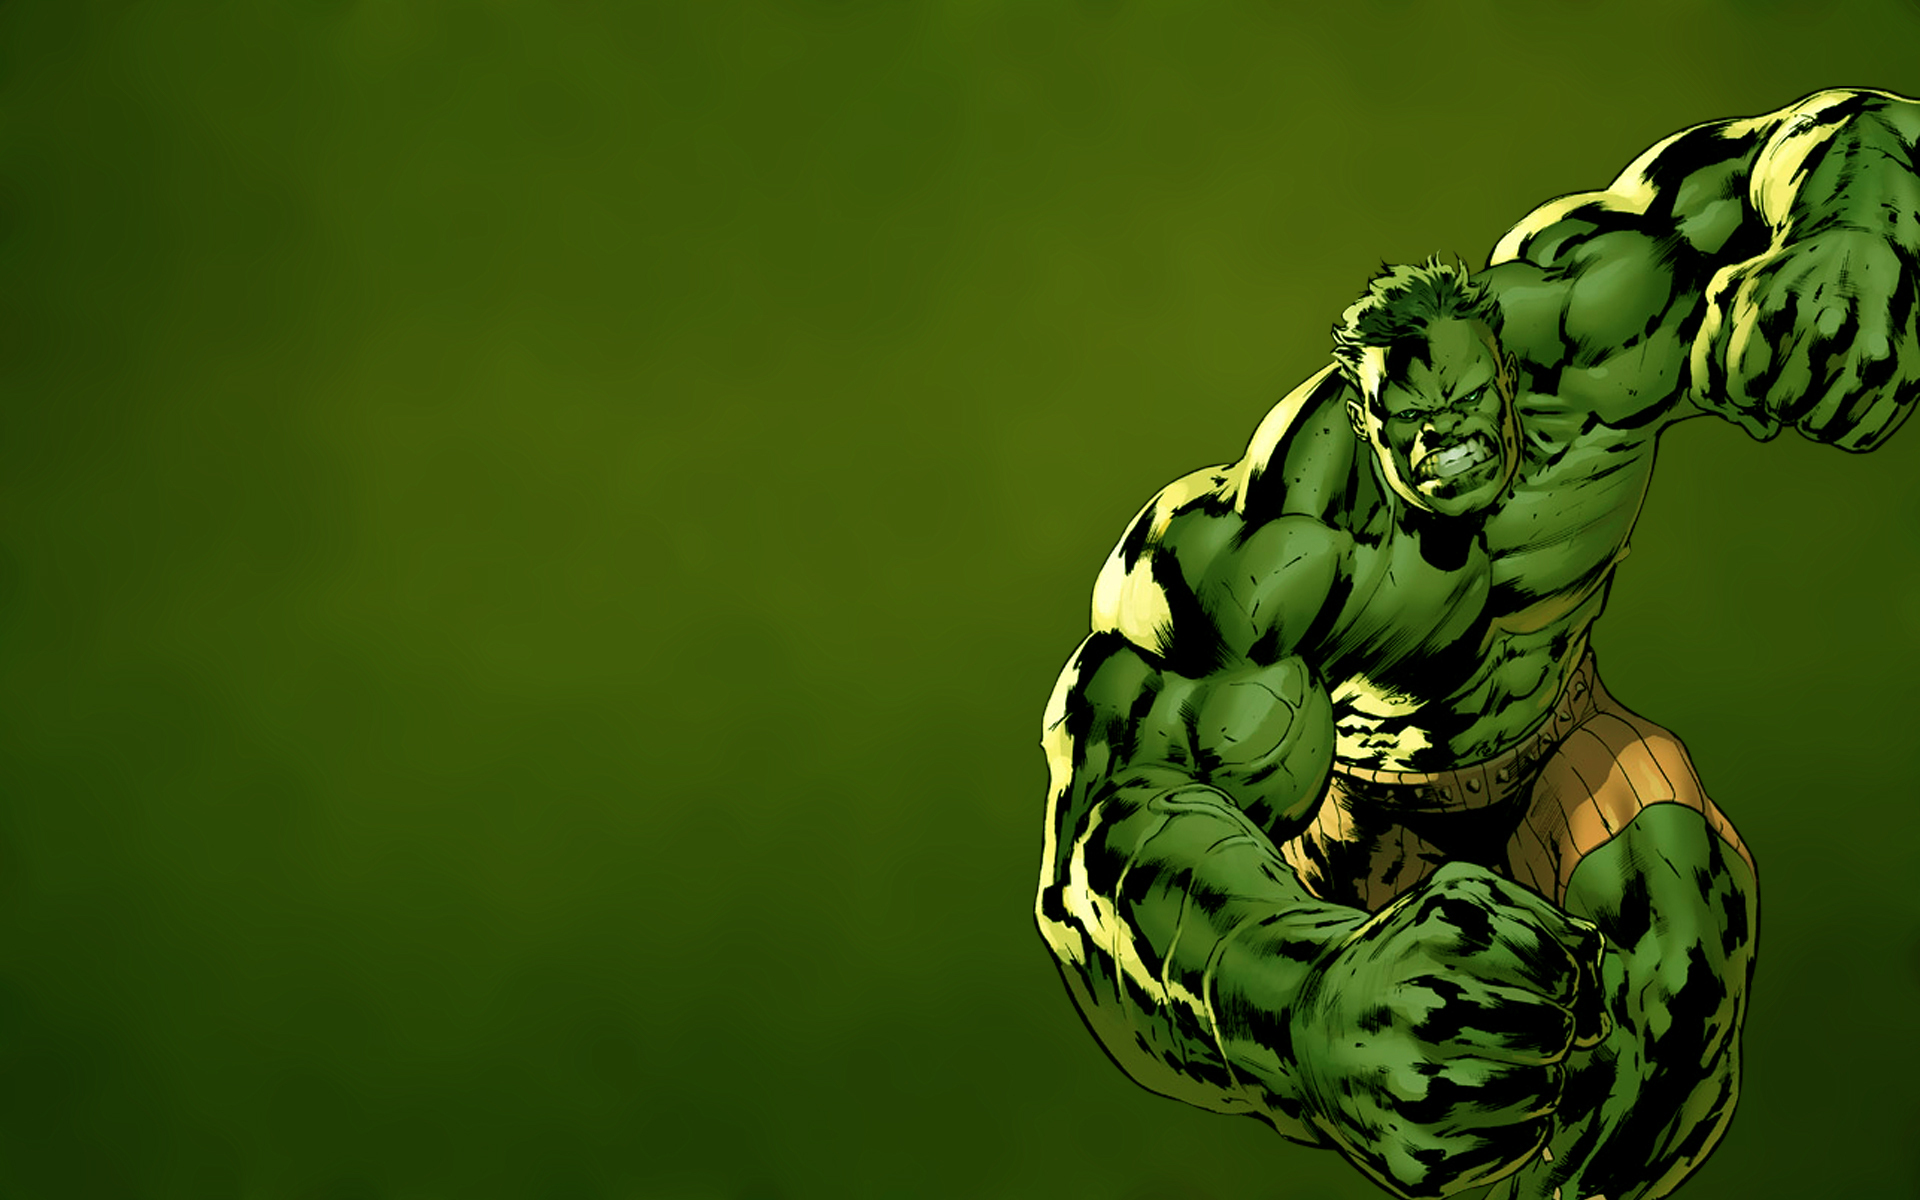 Hulk Backgrounds Pictures Images HD Wallpapers Download Free Images Wallpaper [wallpaper981.blogspot.com]